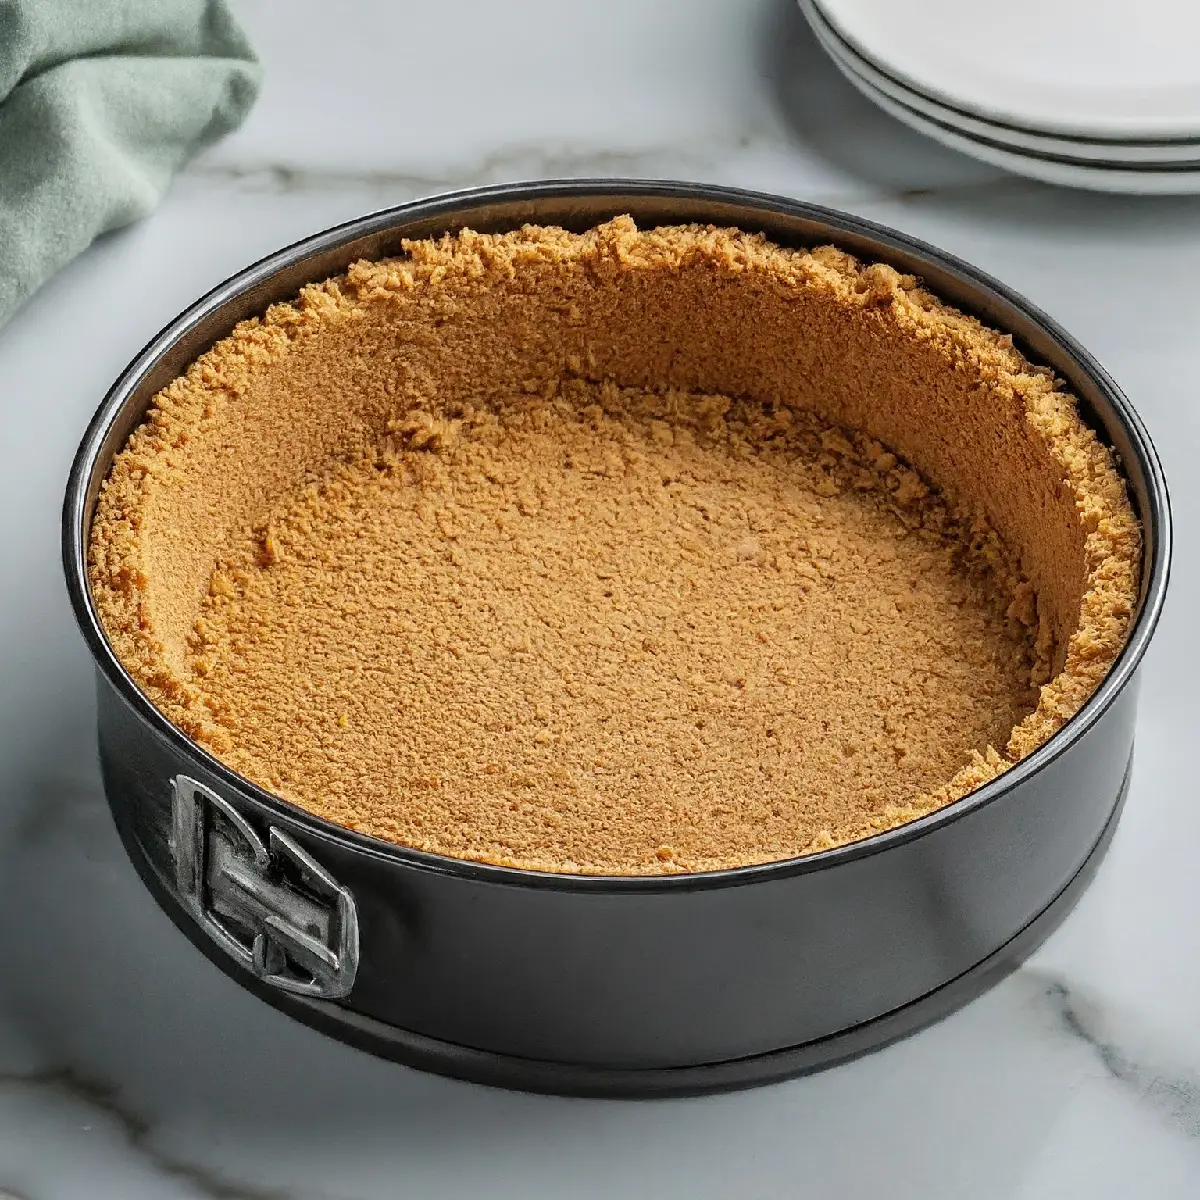 a baking sheet lined with a perfectly pressed graham cracker crust. The crust is golden brown and has a crumbly texture.